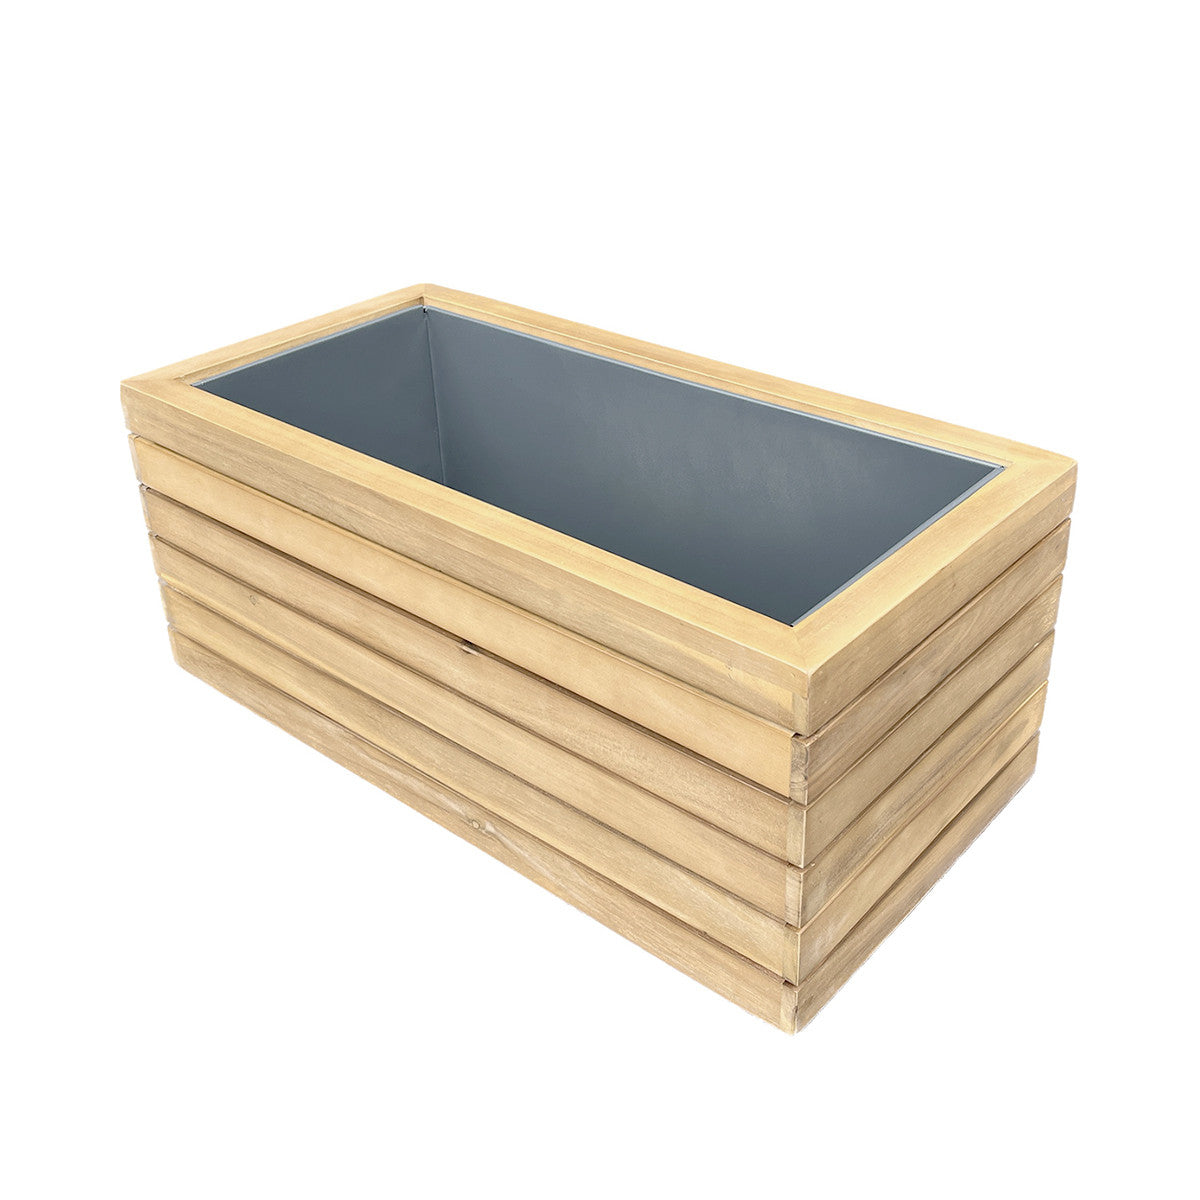 Maze Bali Small Planter / Acacia wood from top-Better Bed Company